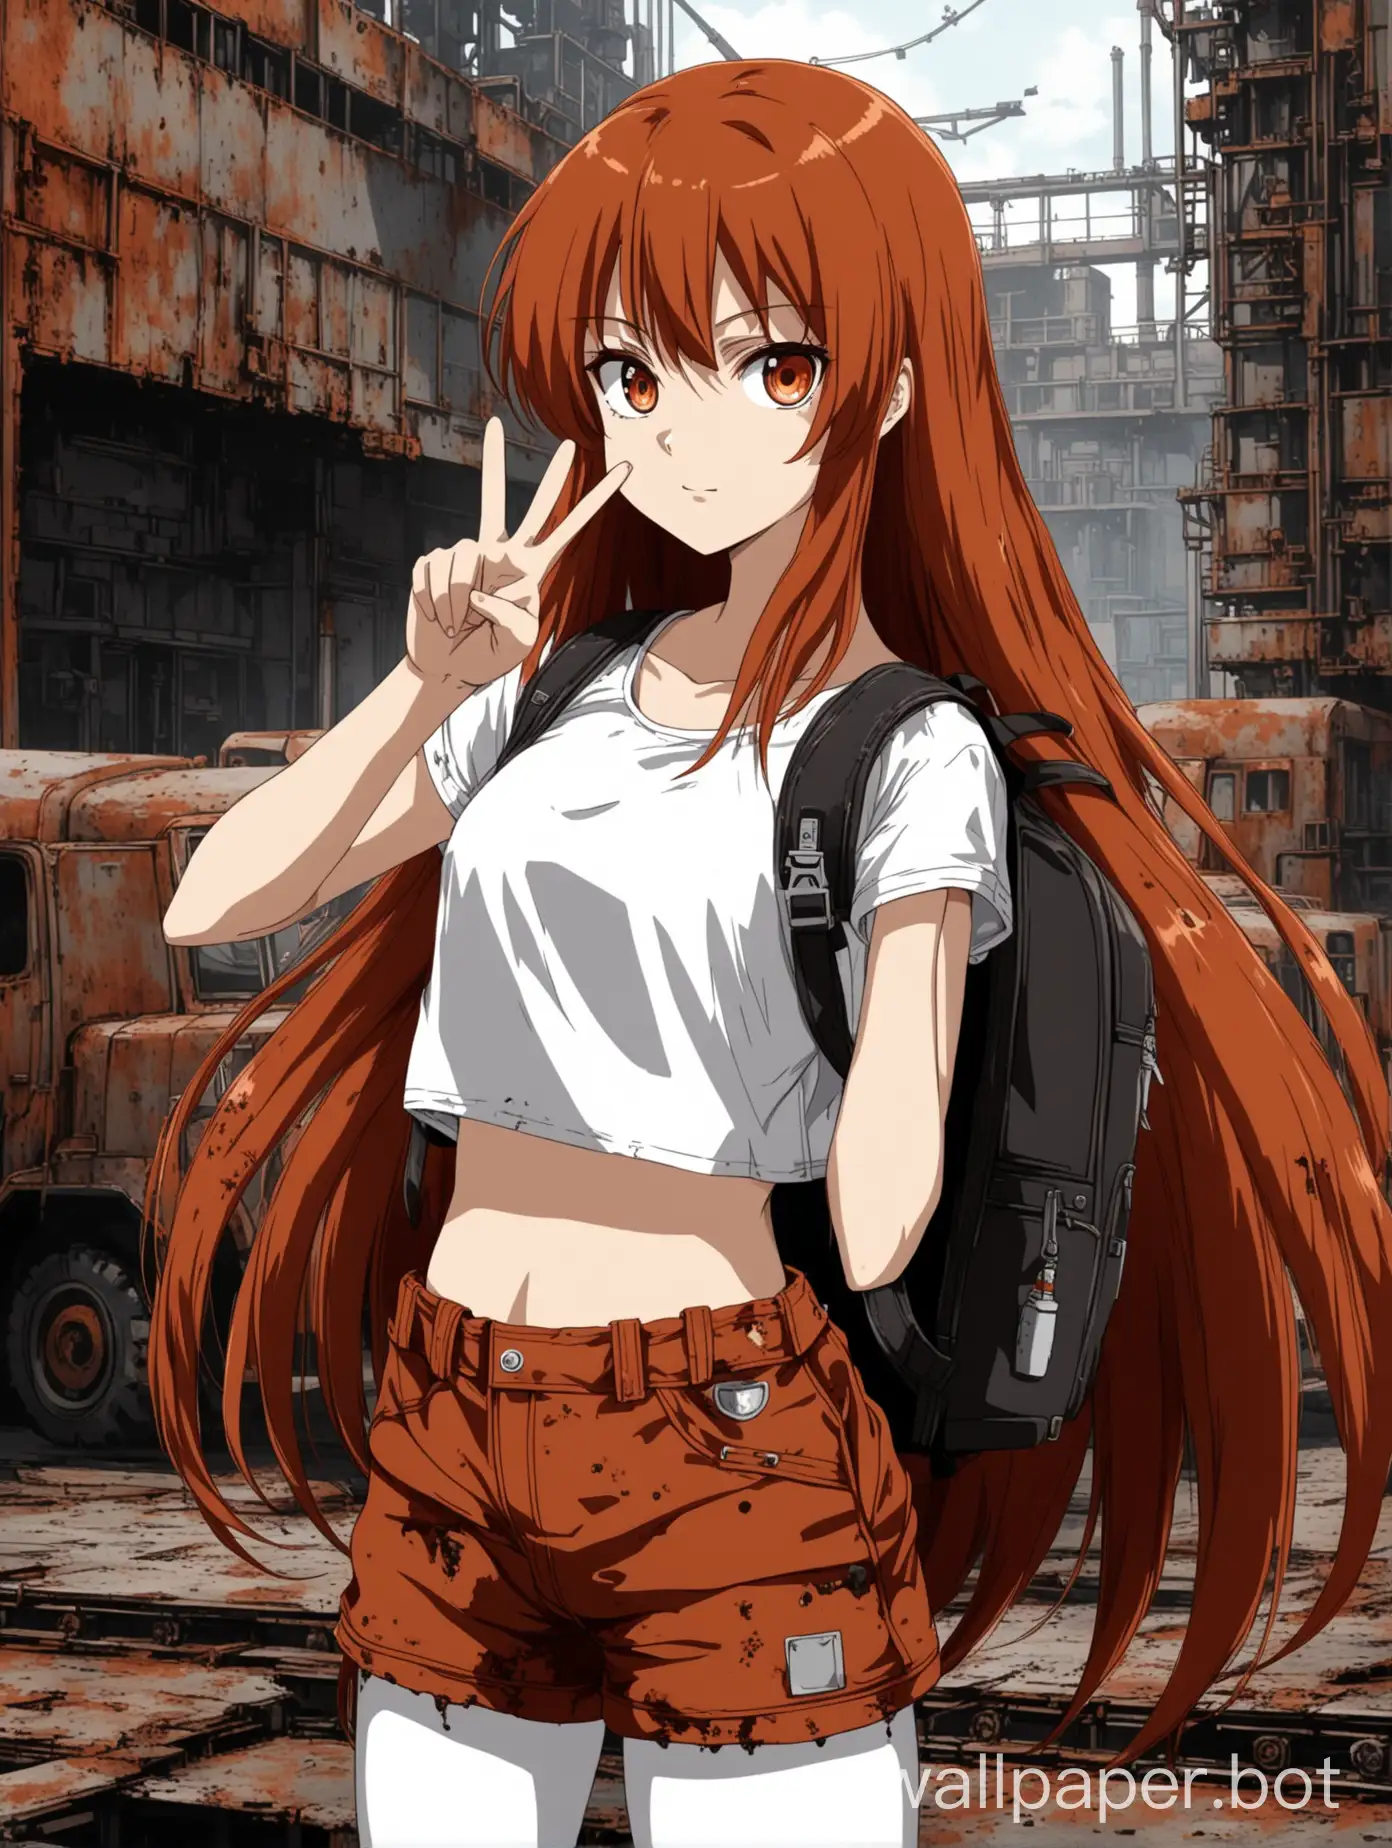 Anime-Girl-with-Long-RustColored-Hair-Doing-V-Sign